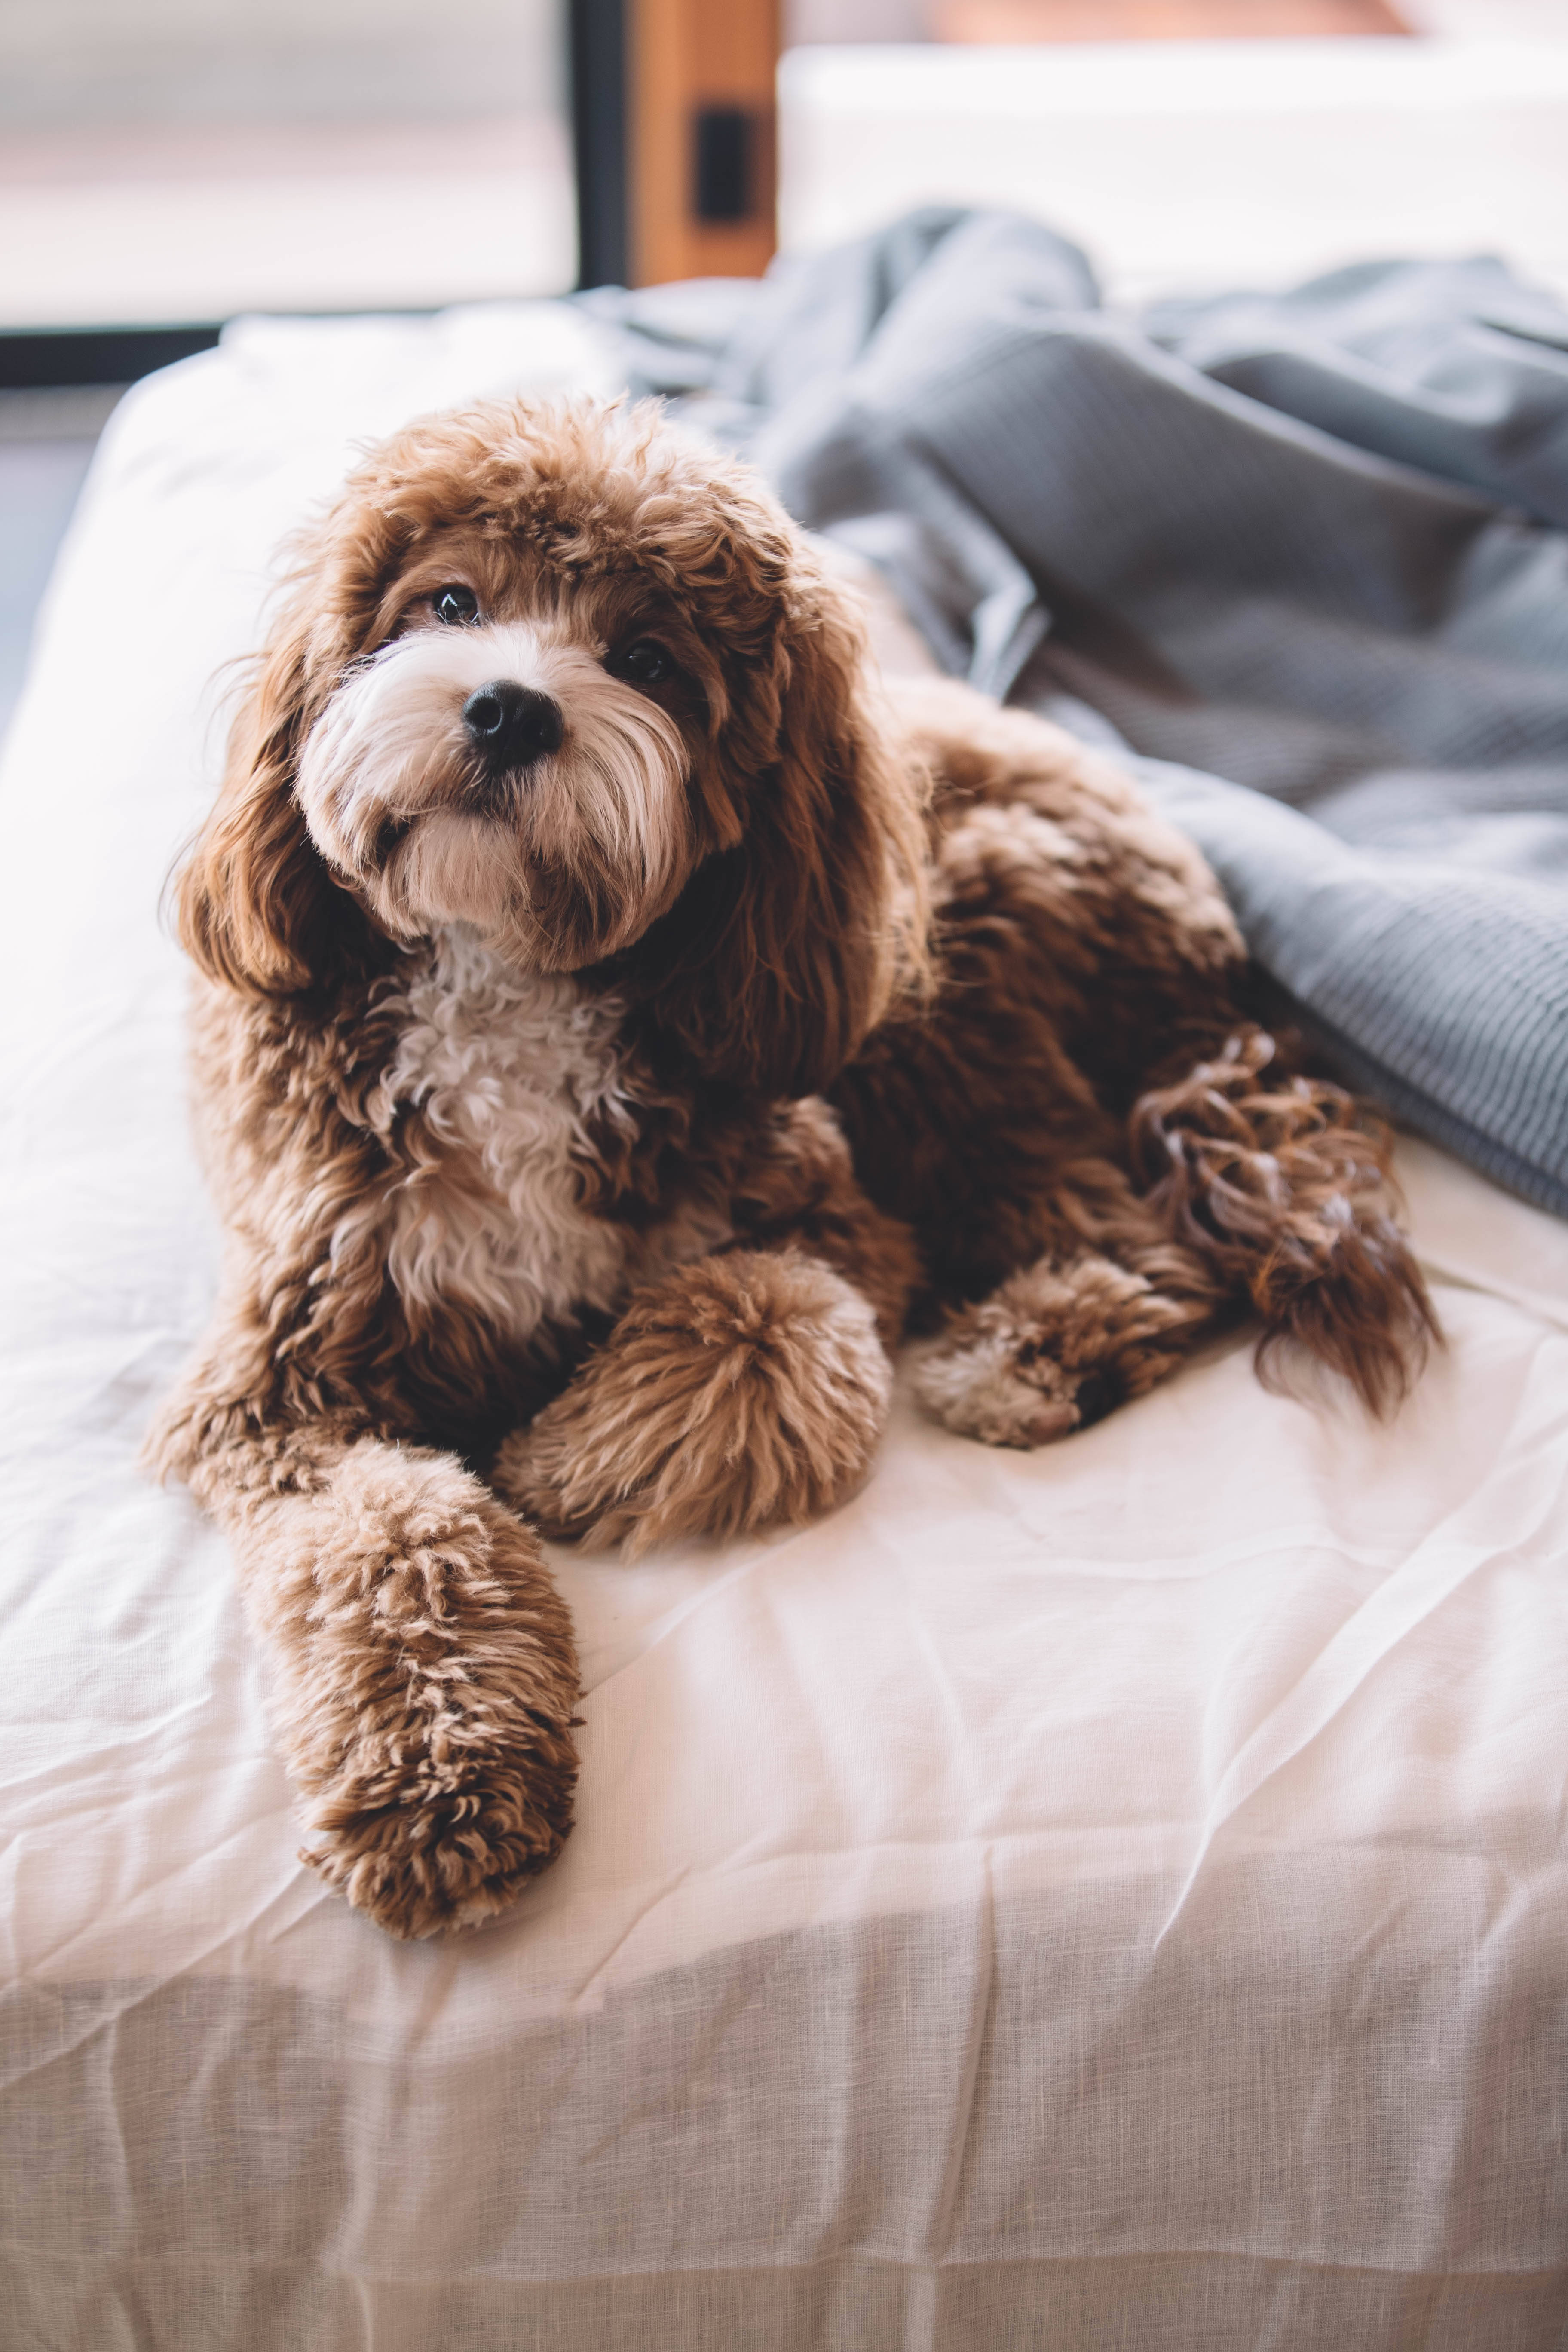 Cavapoo Dog On Bed Background